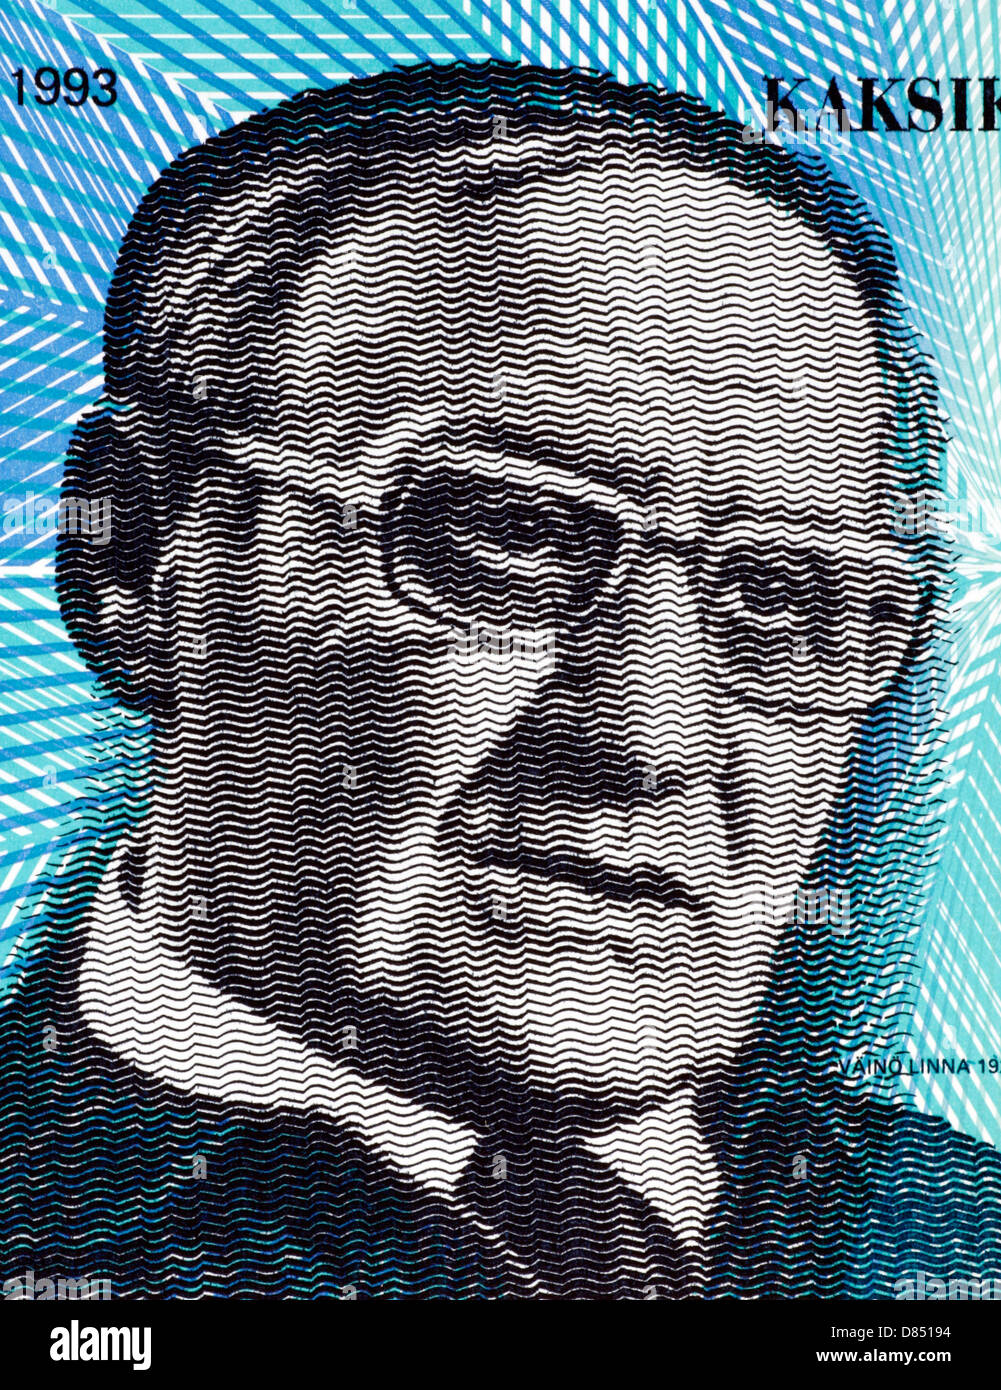 Vaino Linna (1920-1992) 20 Markkaa 1993 Banknote from Finland. One of the most influential Finnish authors of the 20th century. Stock Photo